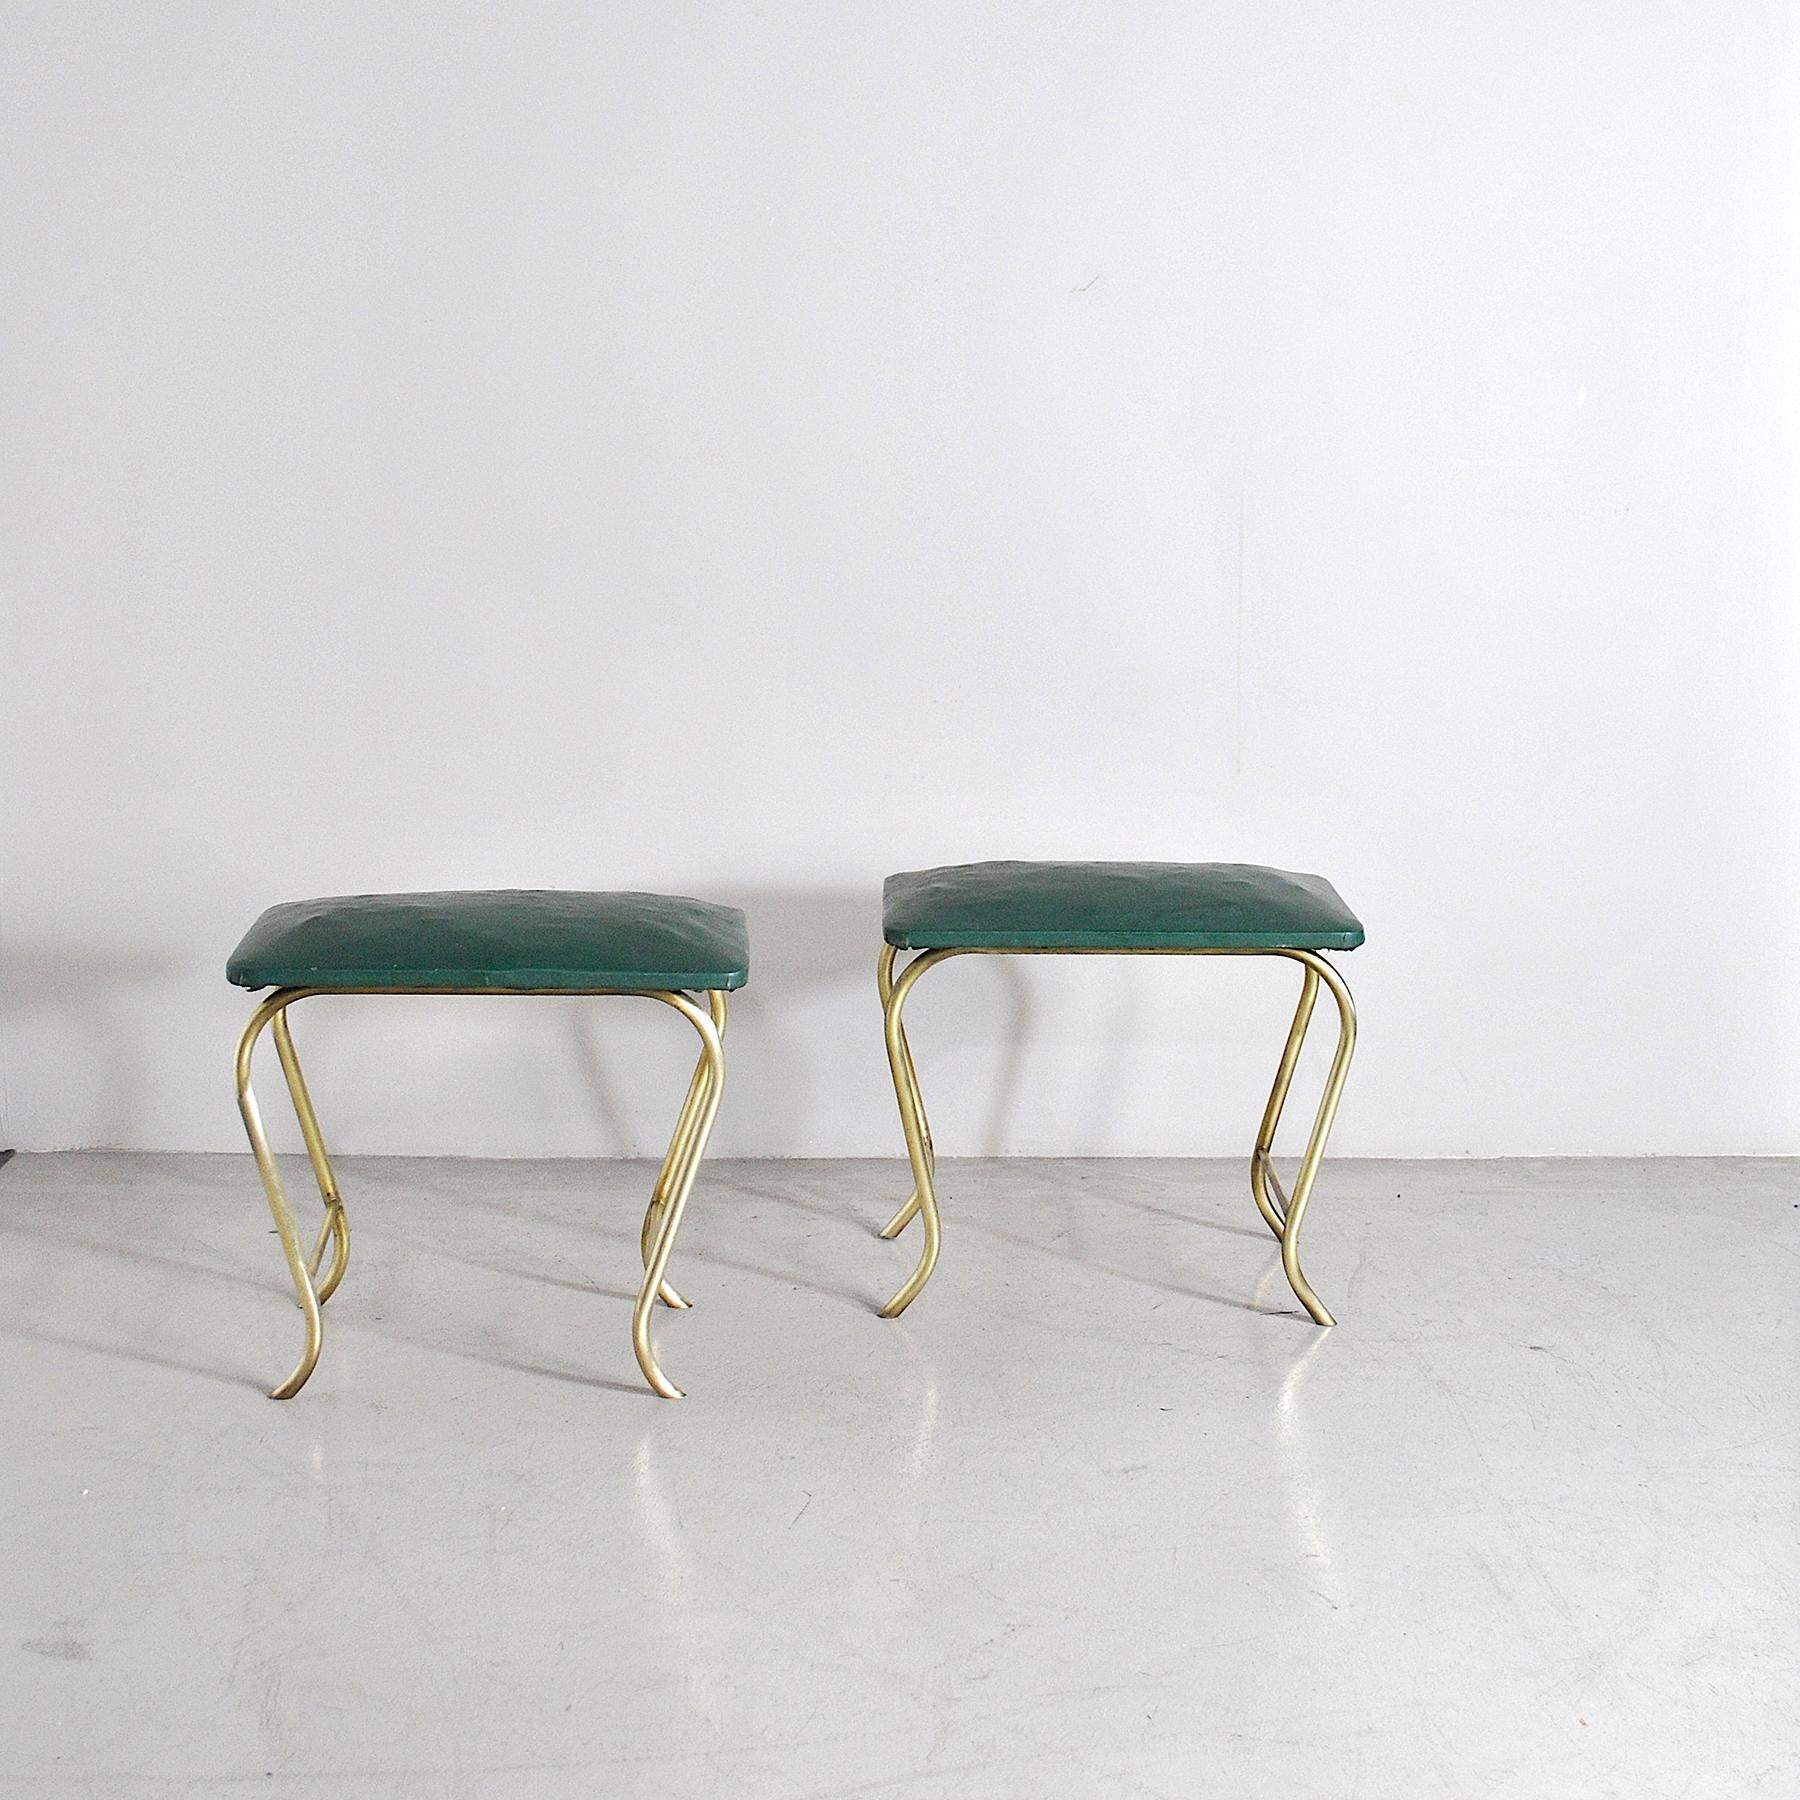 Pair of stools made in Italy from the 1960s, curved tubular structure in brass, seat in original vintage vinyl.